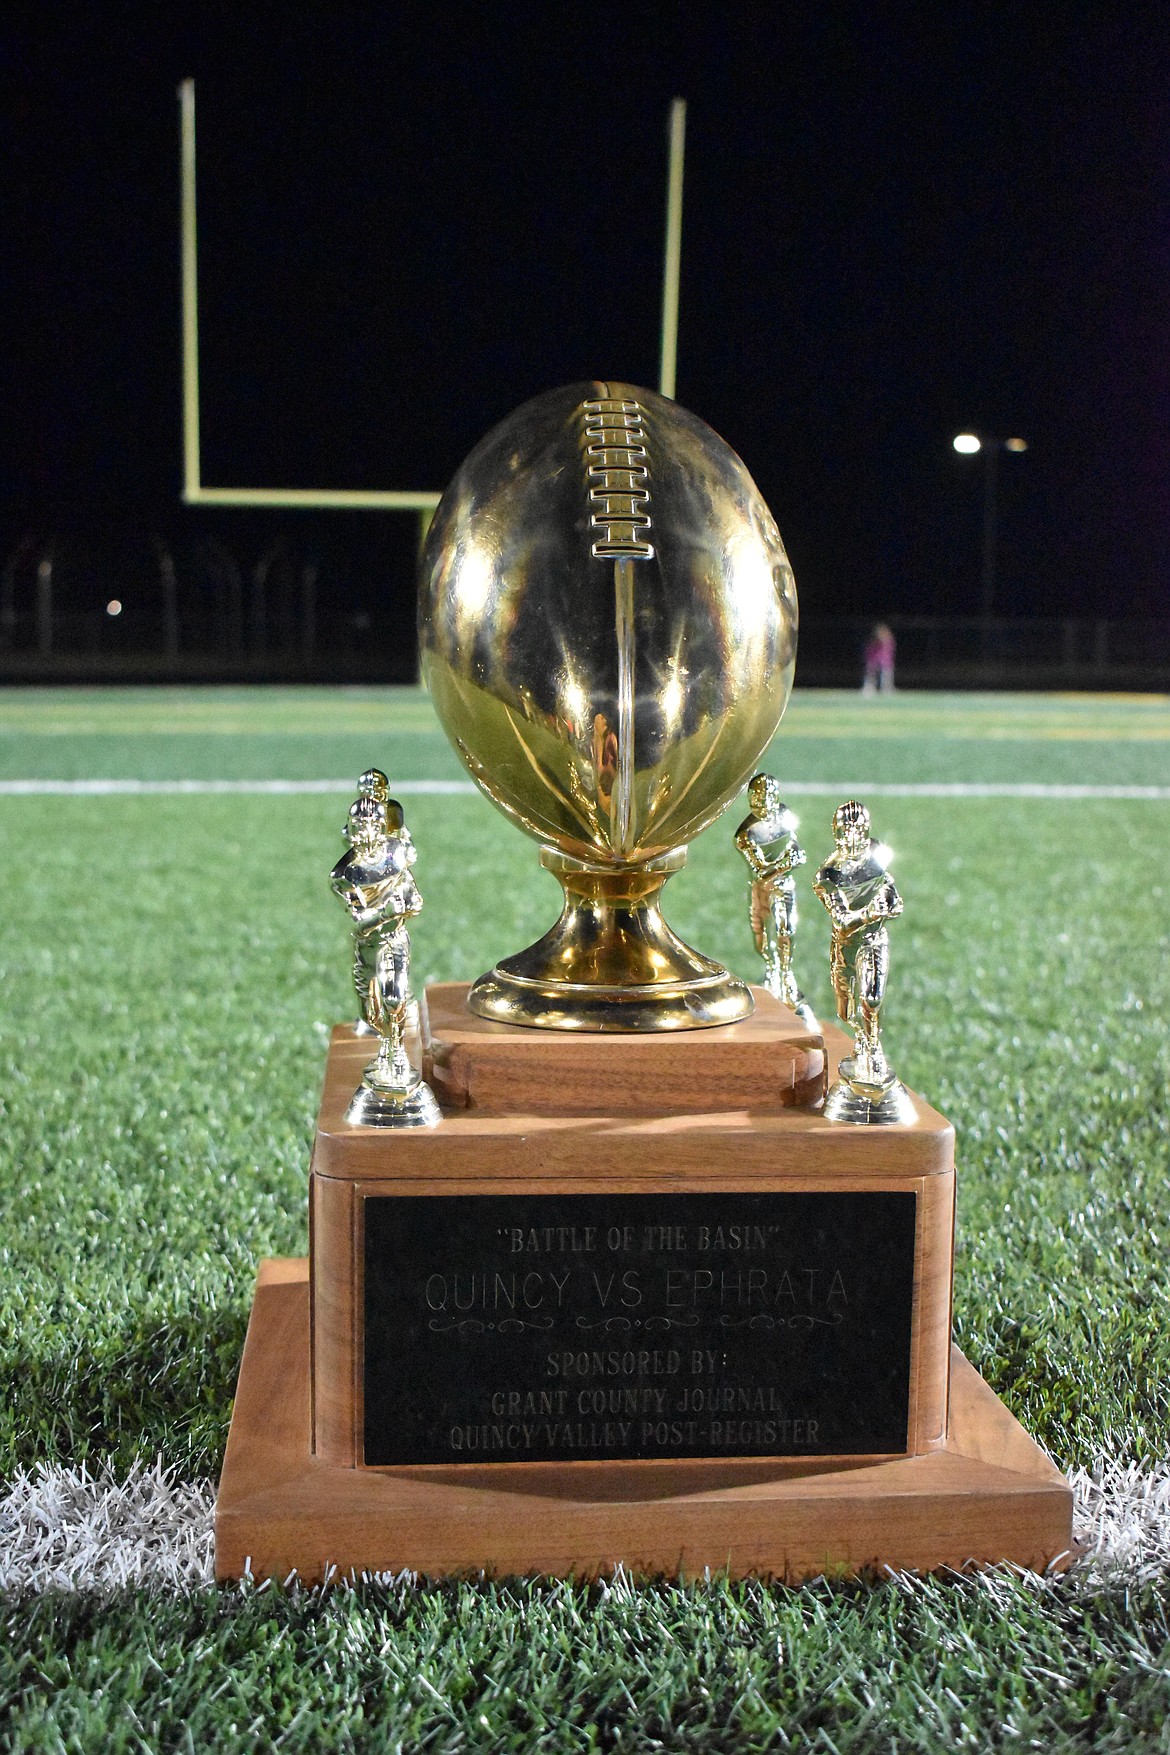 The Battle of the Basin saw Ephrata walk away with the trophy after taking the game 28-0.